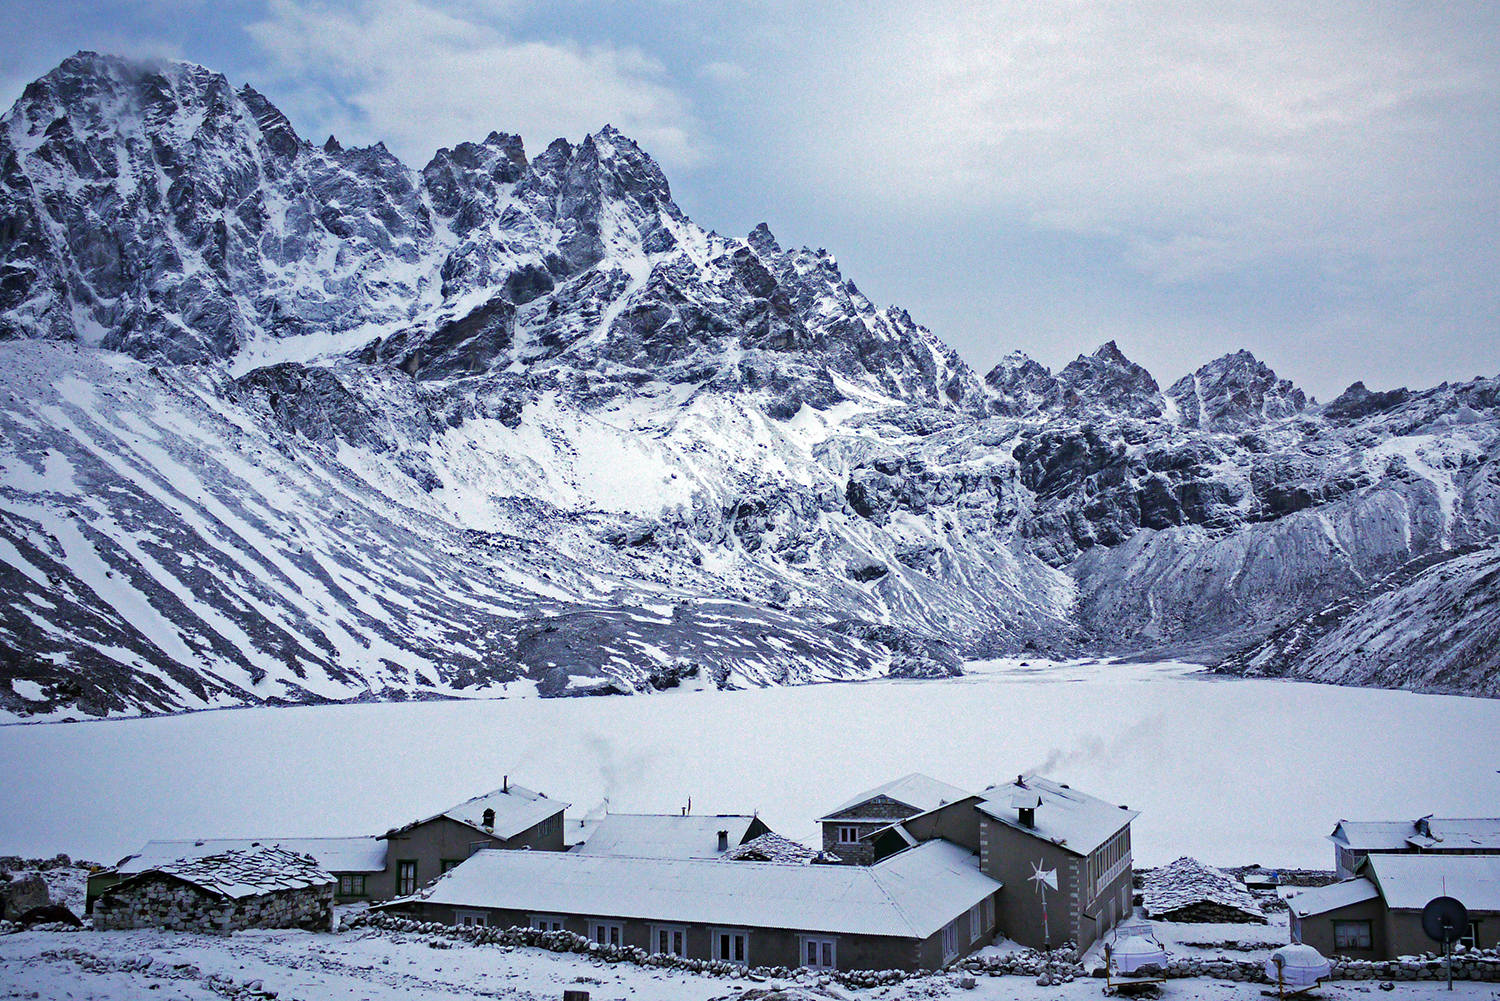 Frozen Gokyo Lake away from the main Everest Base Camp trail